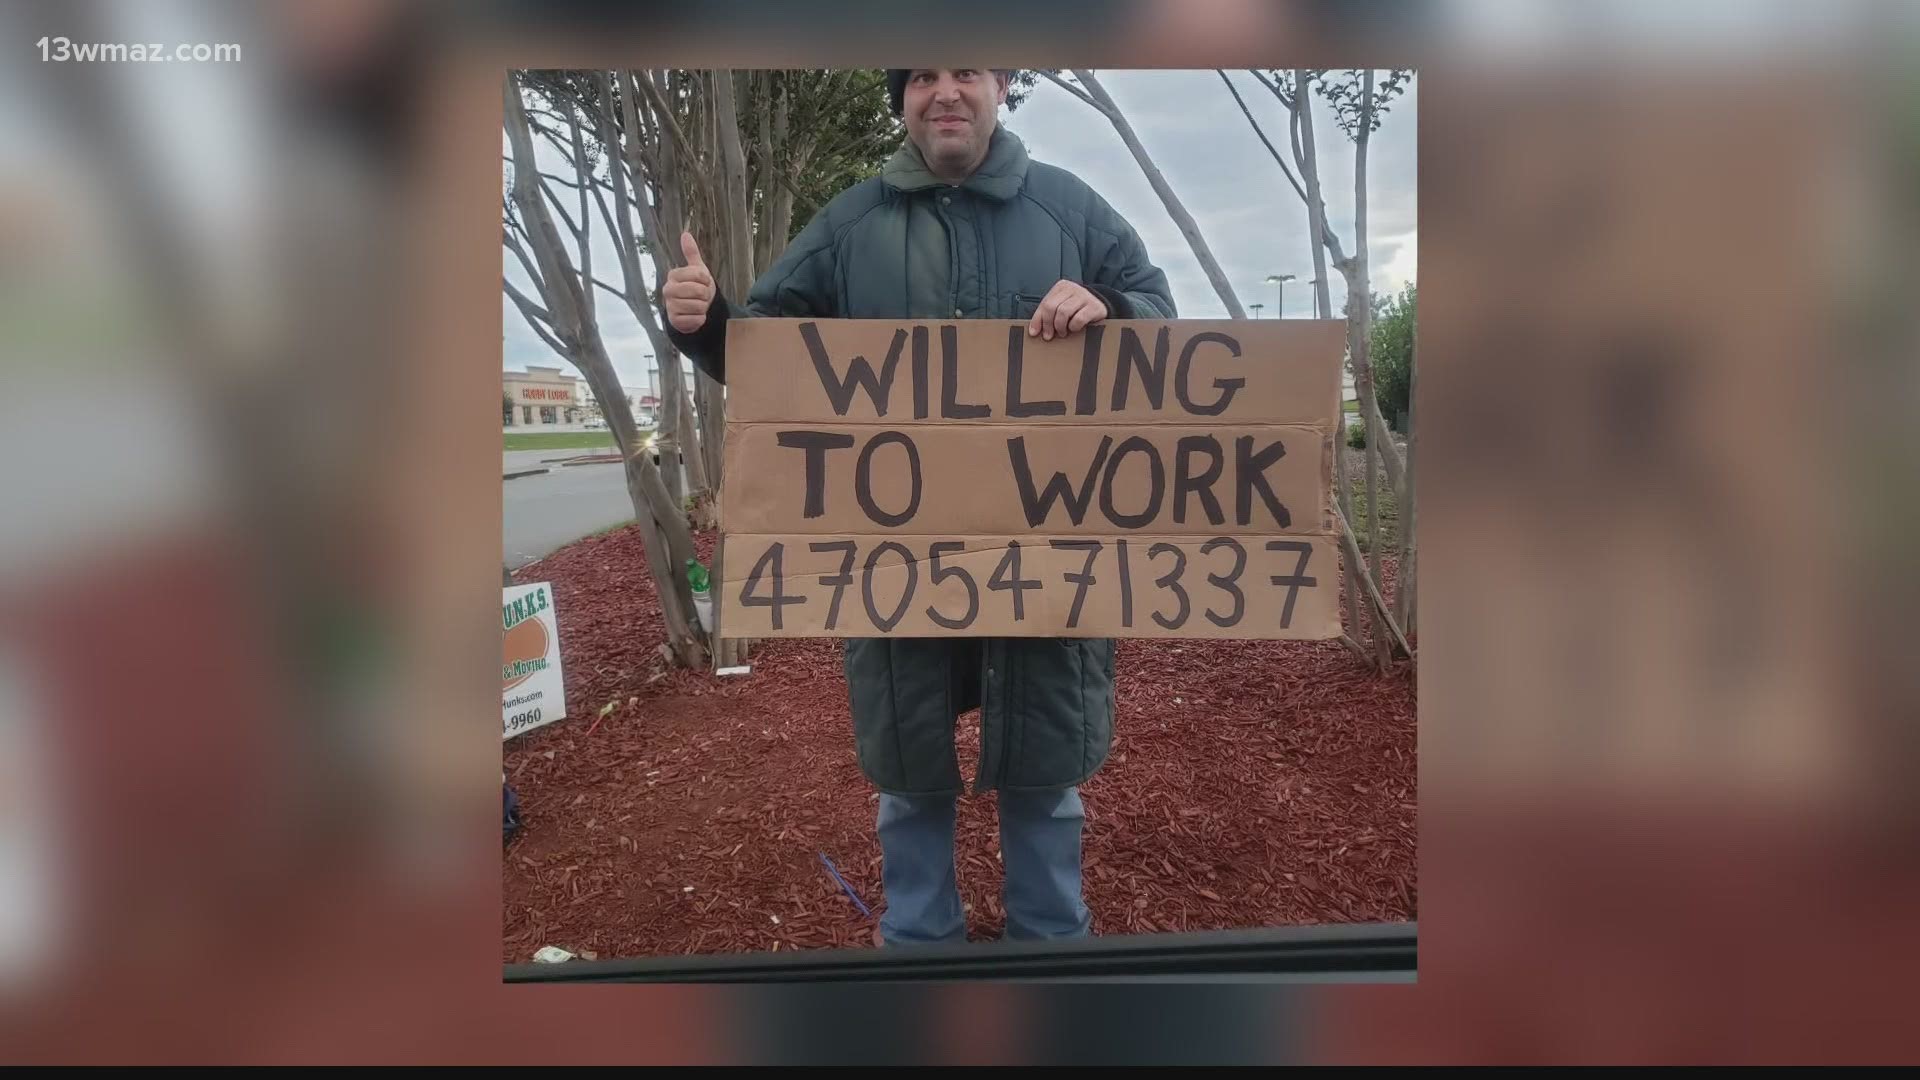 People in Warner Robins are trying to help a homeless man get back on his feet.